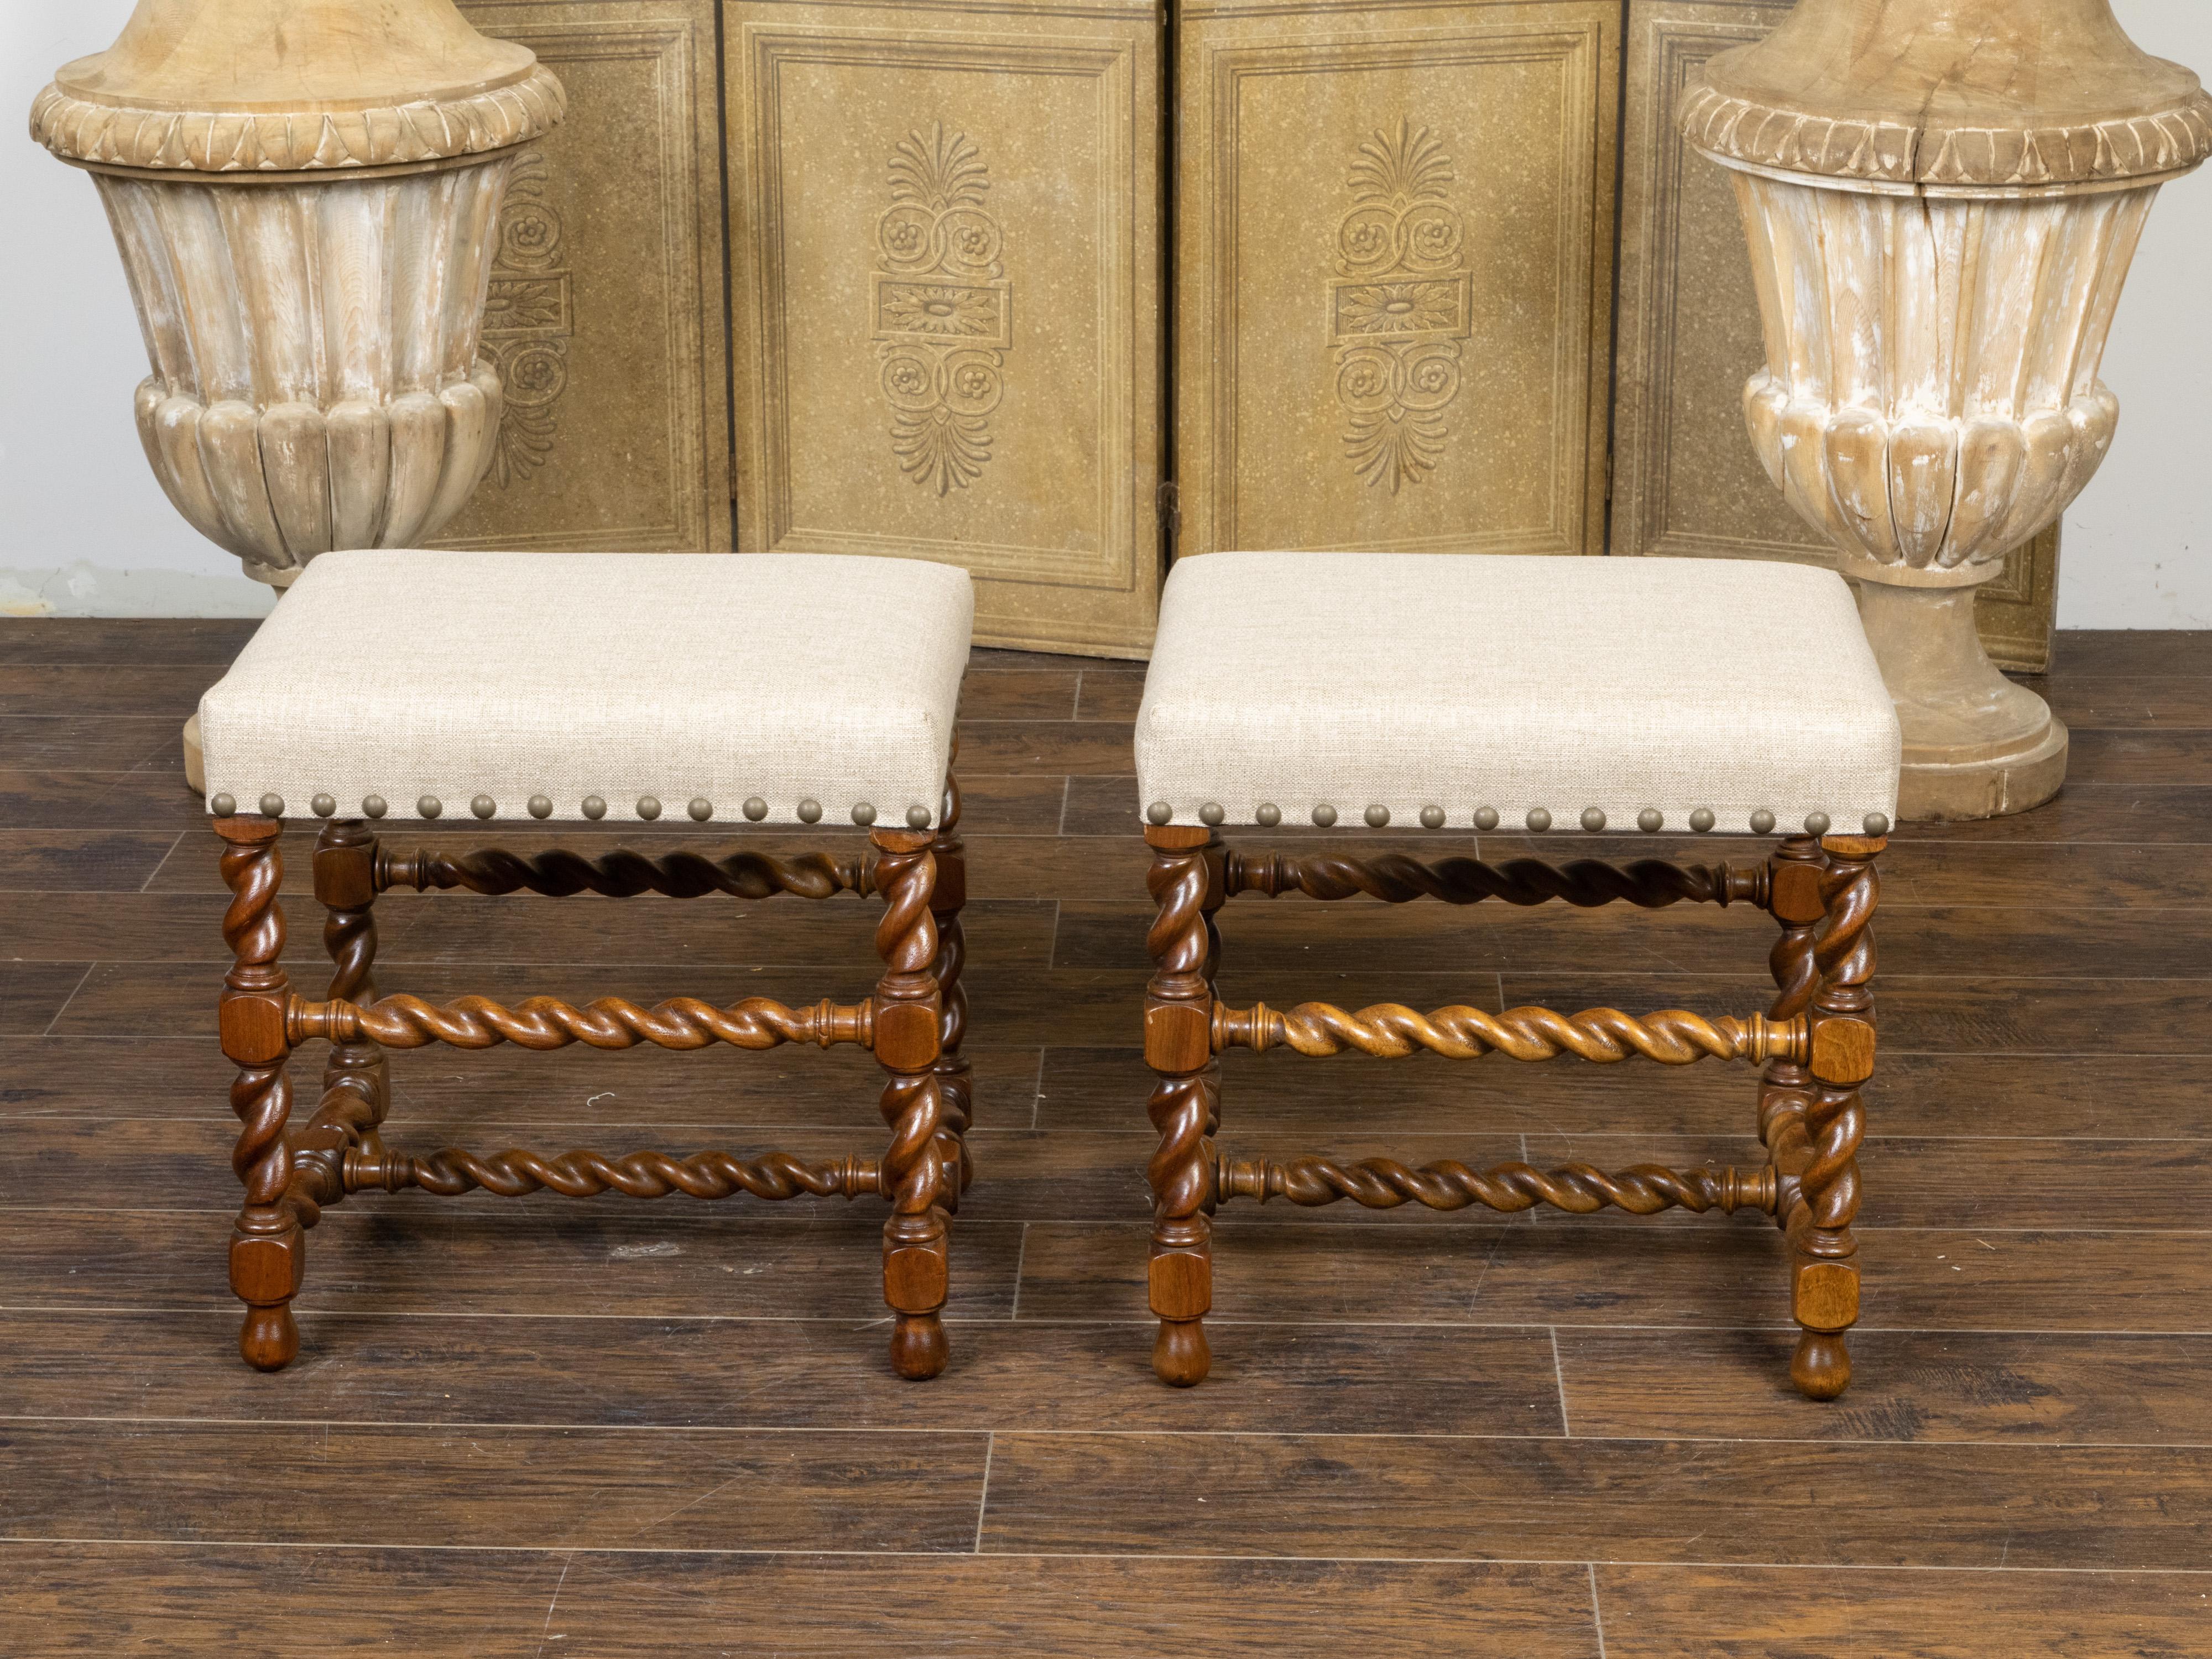 A pair of English oak stools from the early 20th century, with barley twist bases and new linen upholstery accented with a brass nailhead trim. Created in England during the vibrant Roaring Twenties in the first quarter of the 20th century, each of